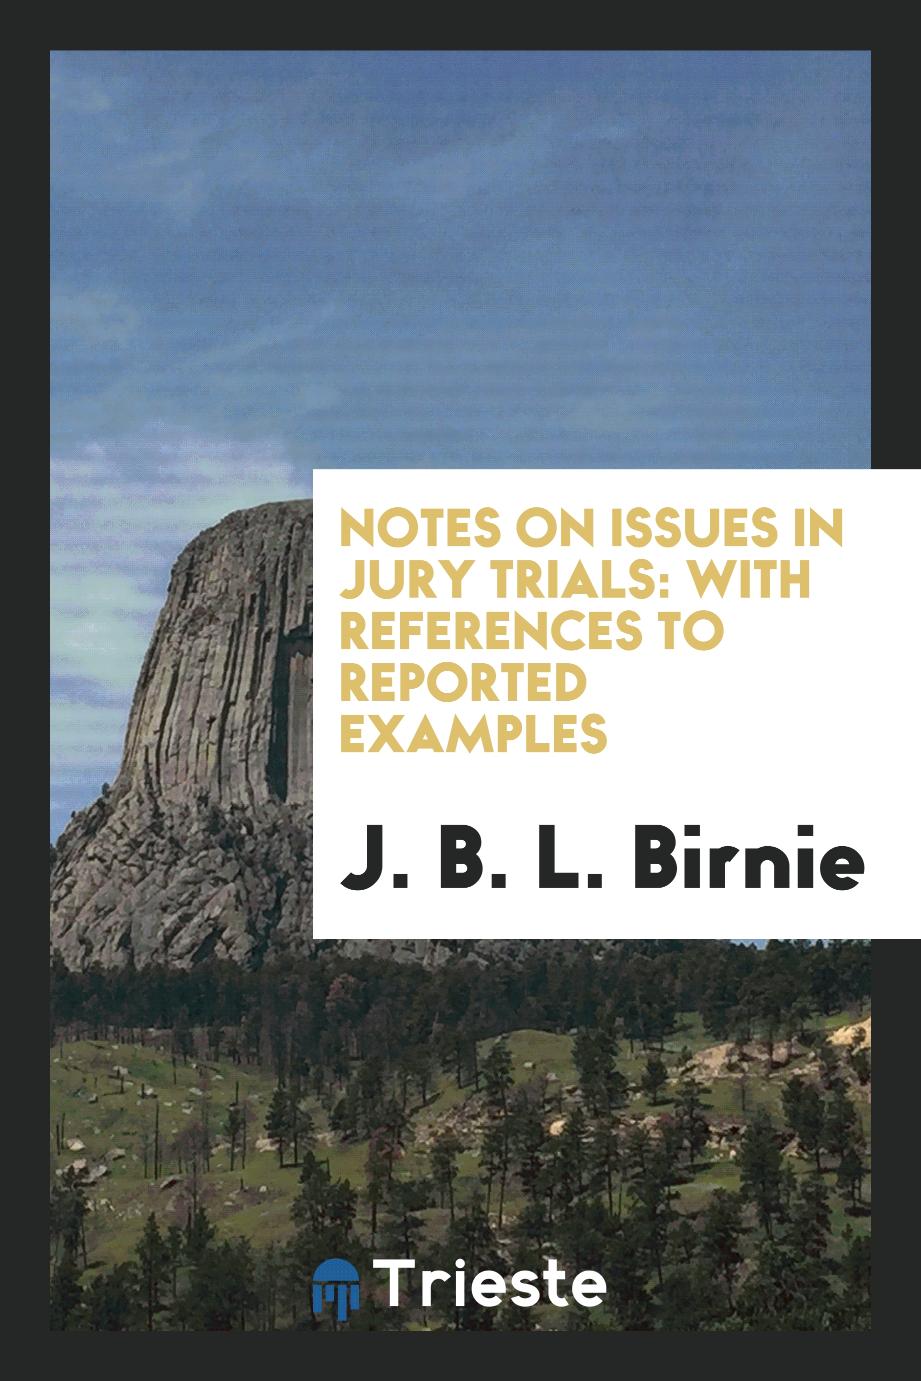 Notes on Issues in Jury Trials: With References to Reported Examples